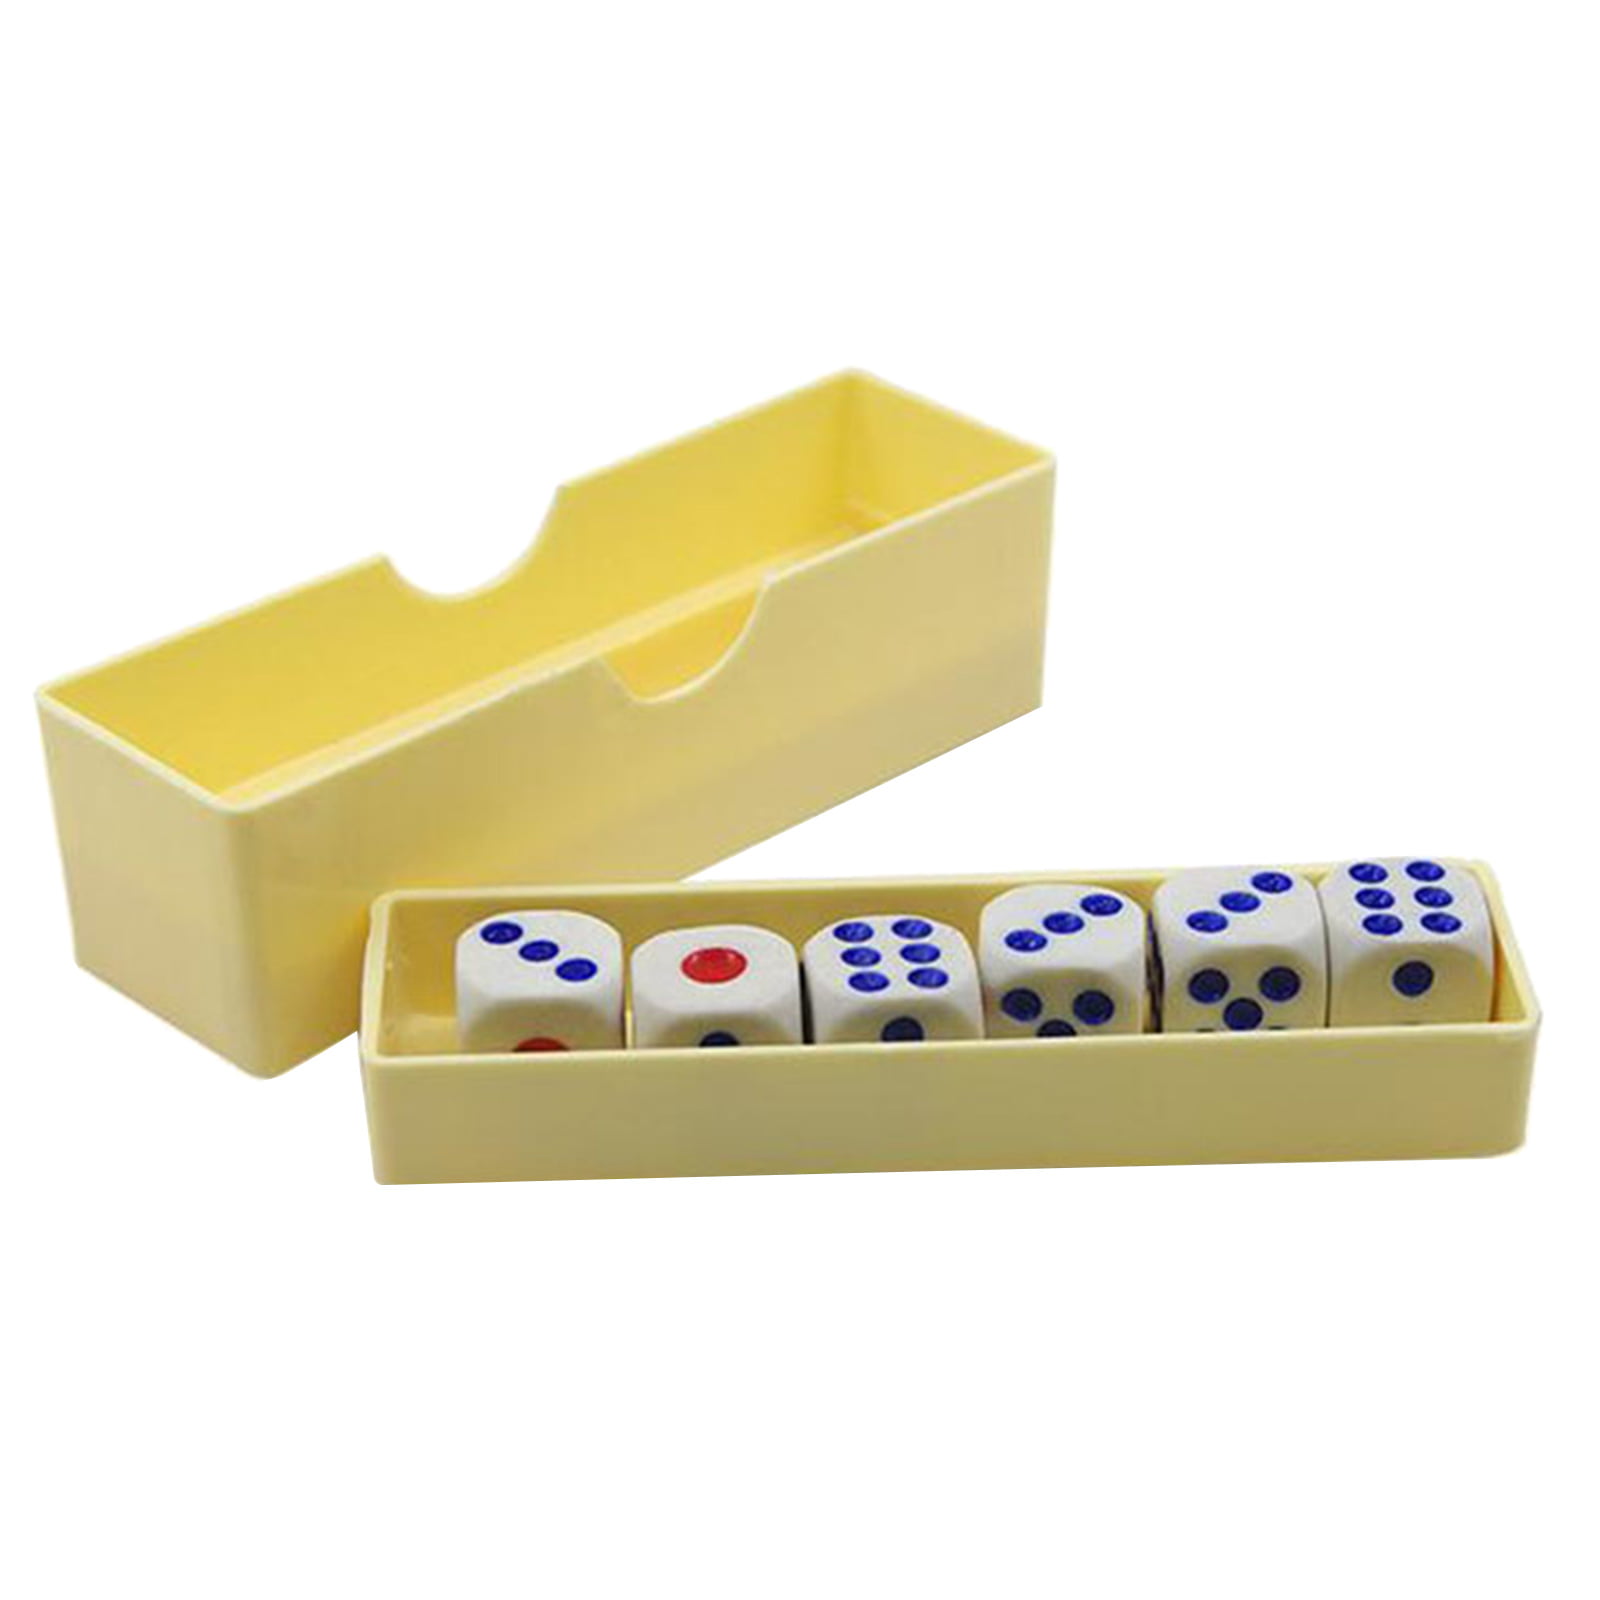 Set of Classical 6 Prediction Flash Dices Changing Dice Effect Magicians Trick 